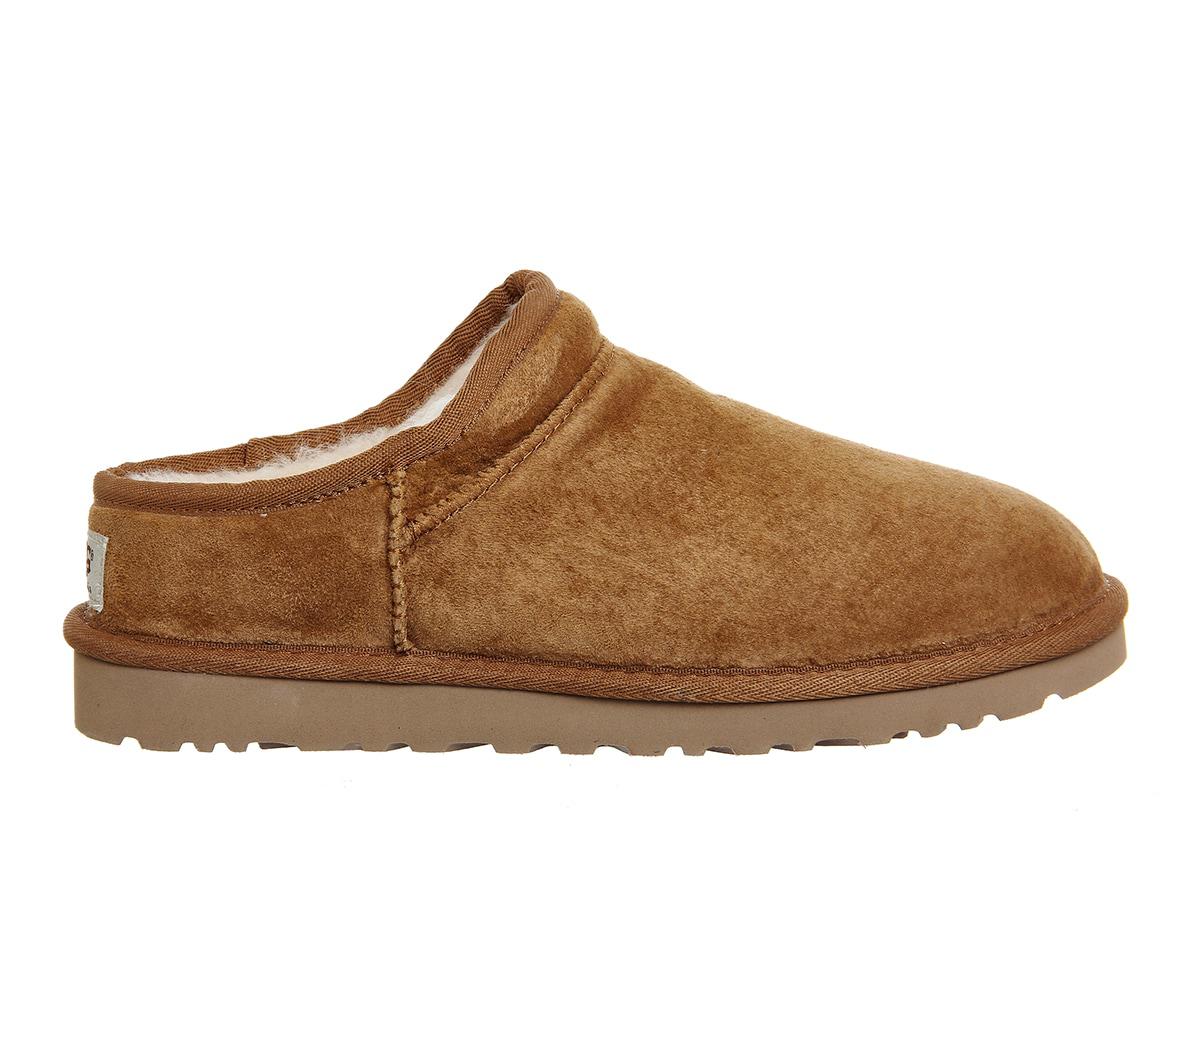 UGG Classic Slippers in Chestnut (Brown) - Lyst